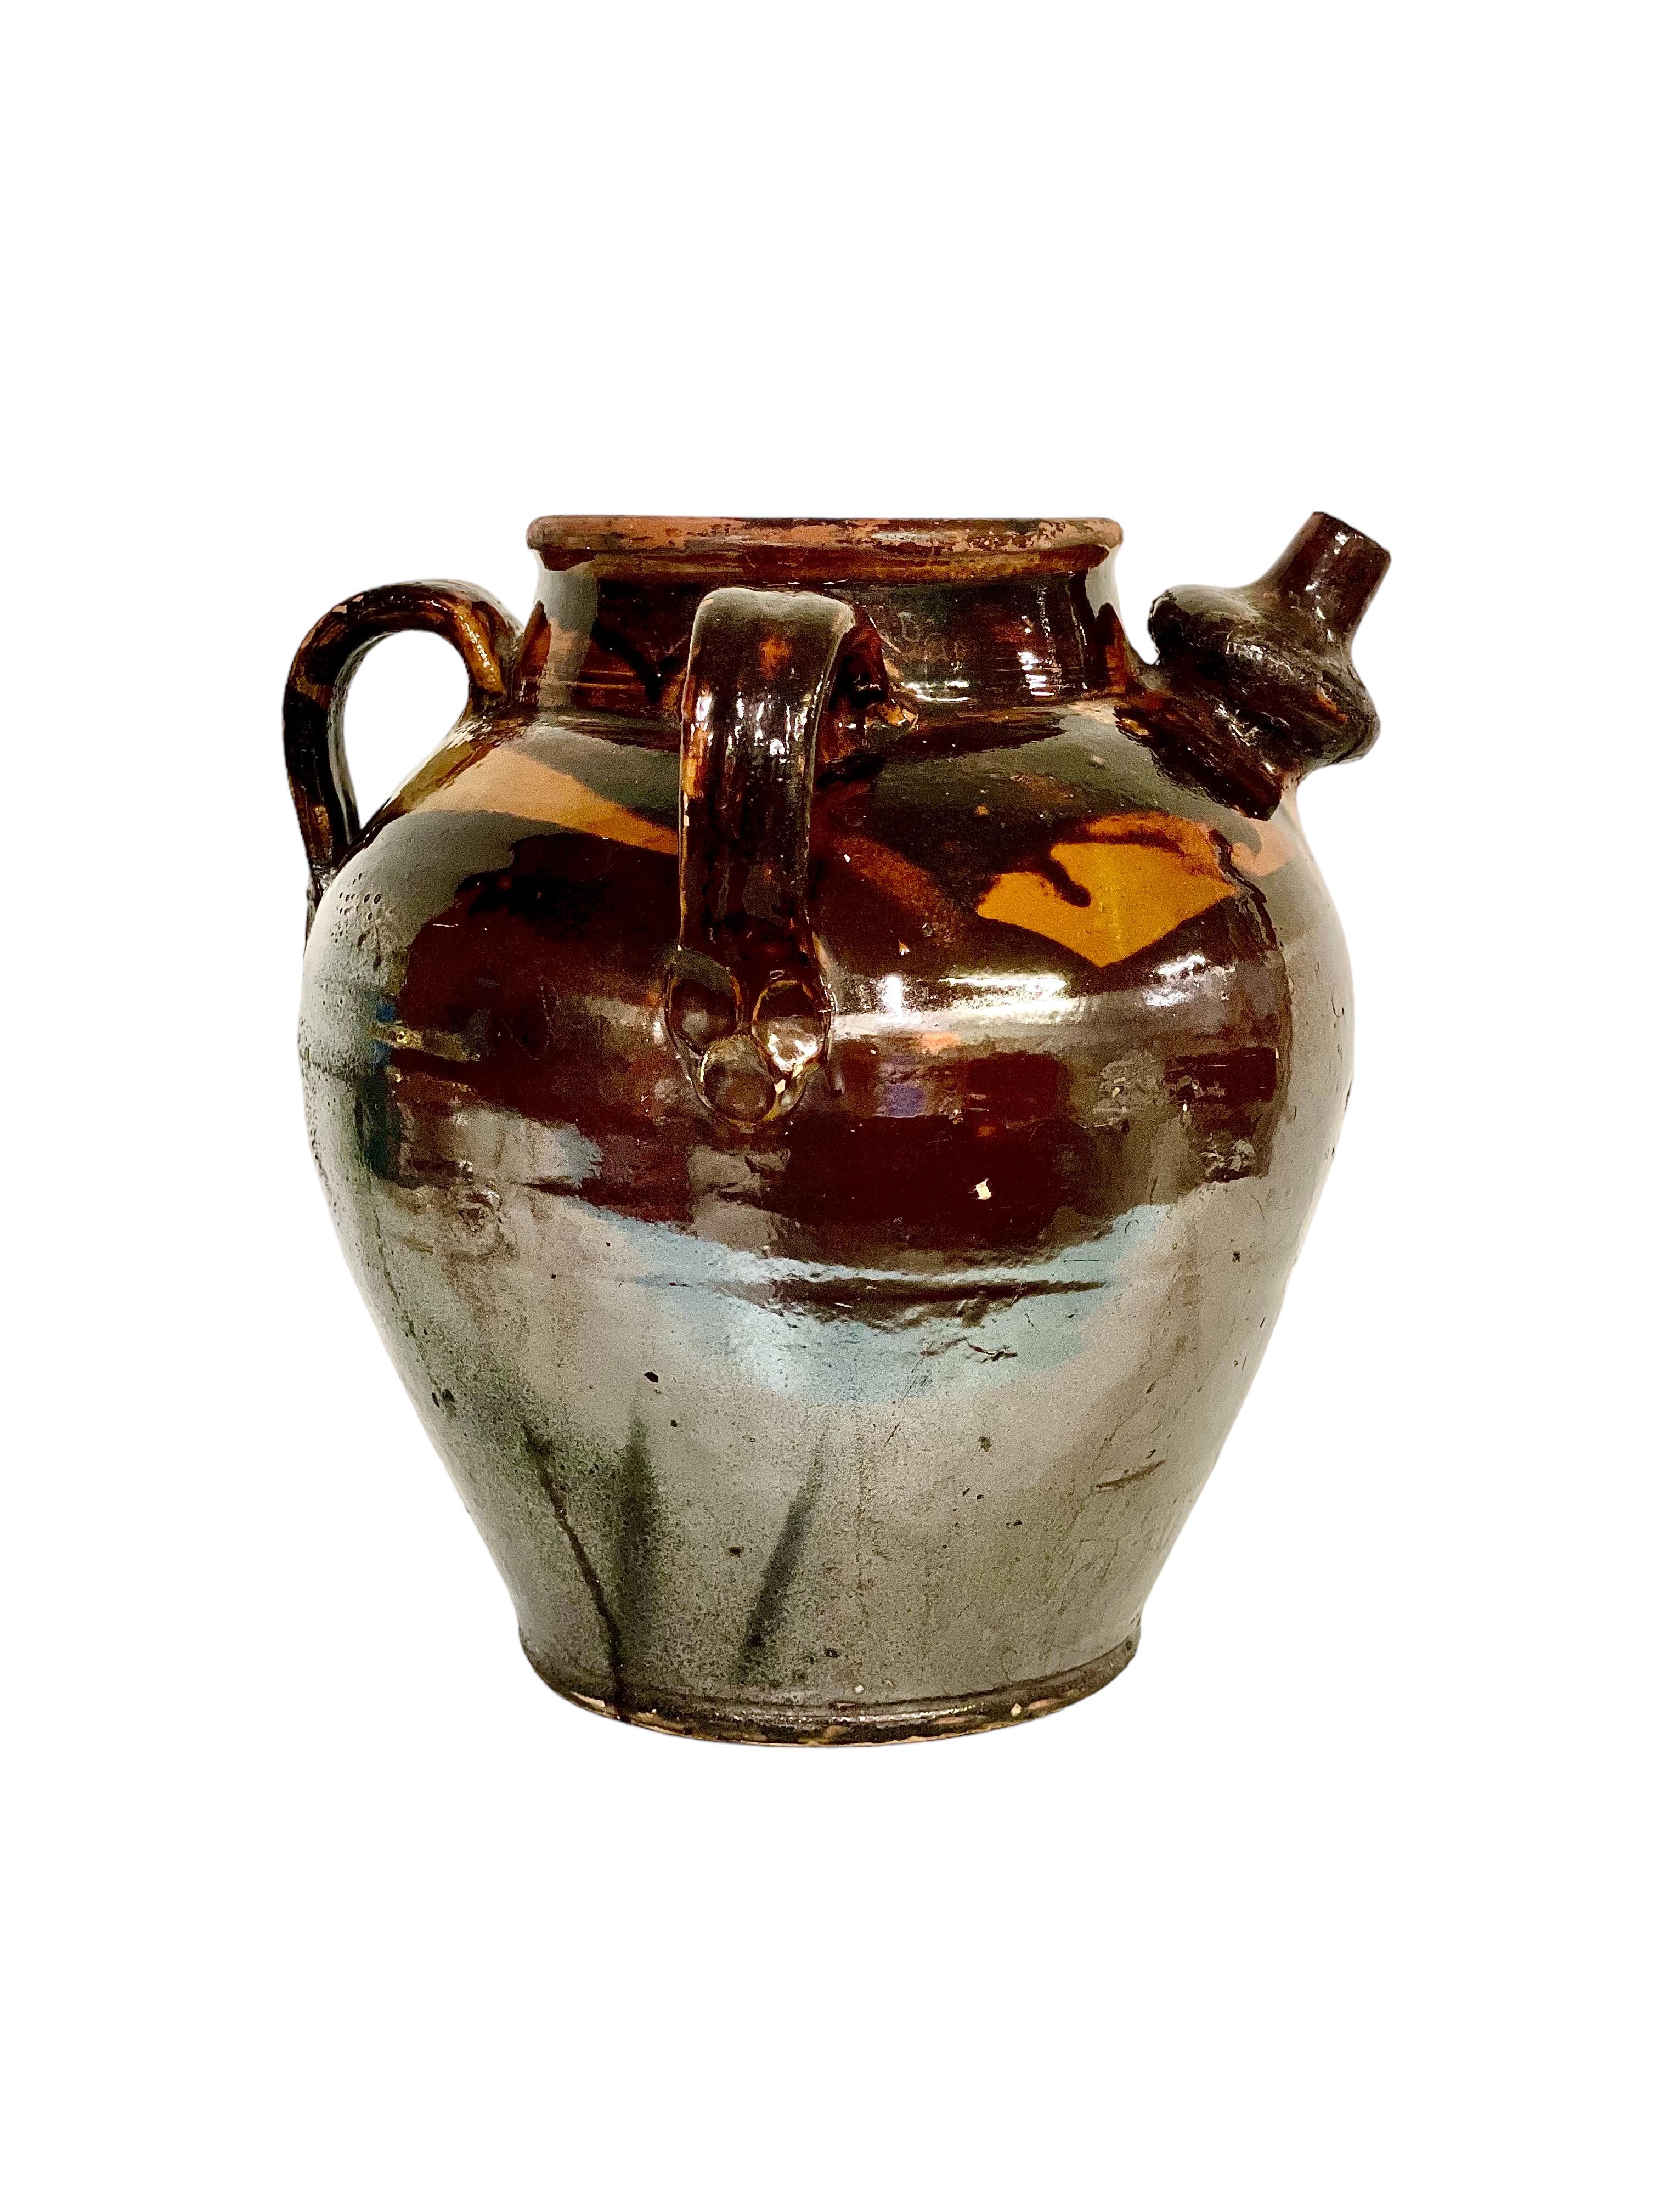 19th Century 19th C. Brown and Yellow Glazed Oil Jar For Sale